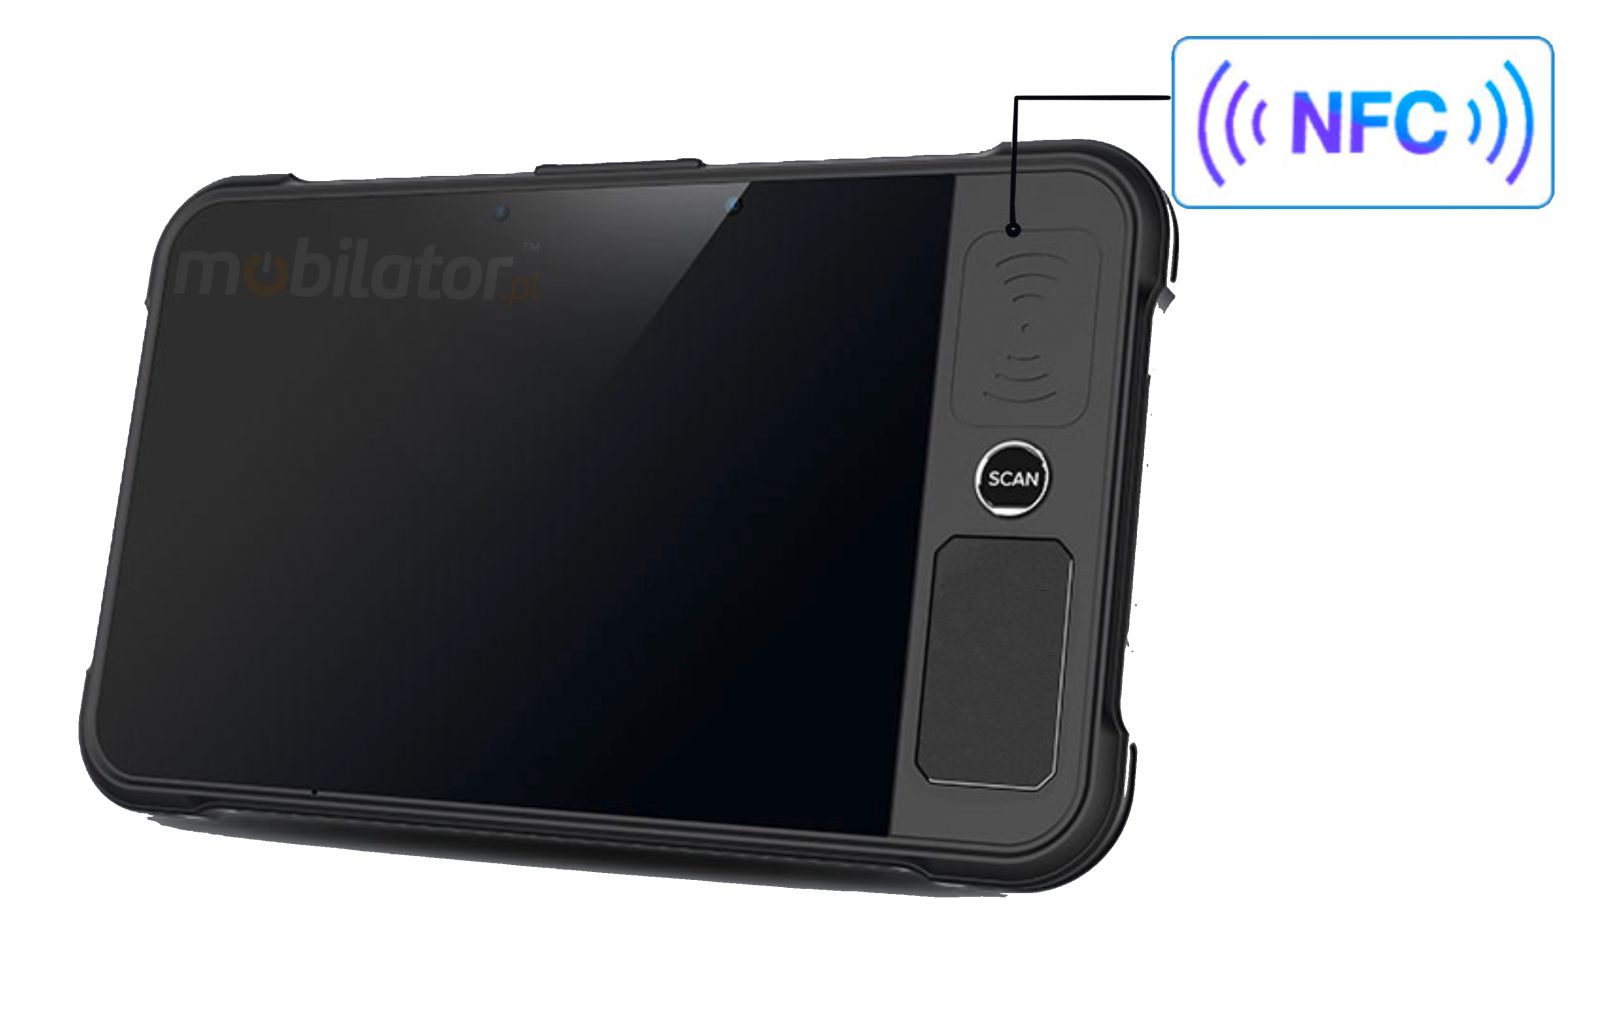 built-in NFC that works for short distance on the front of the tablet P80-PE